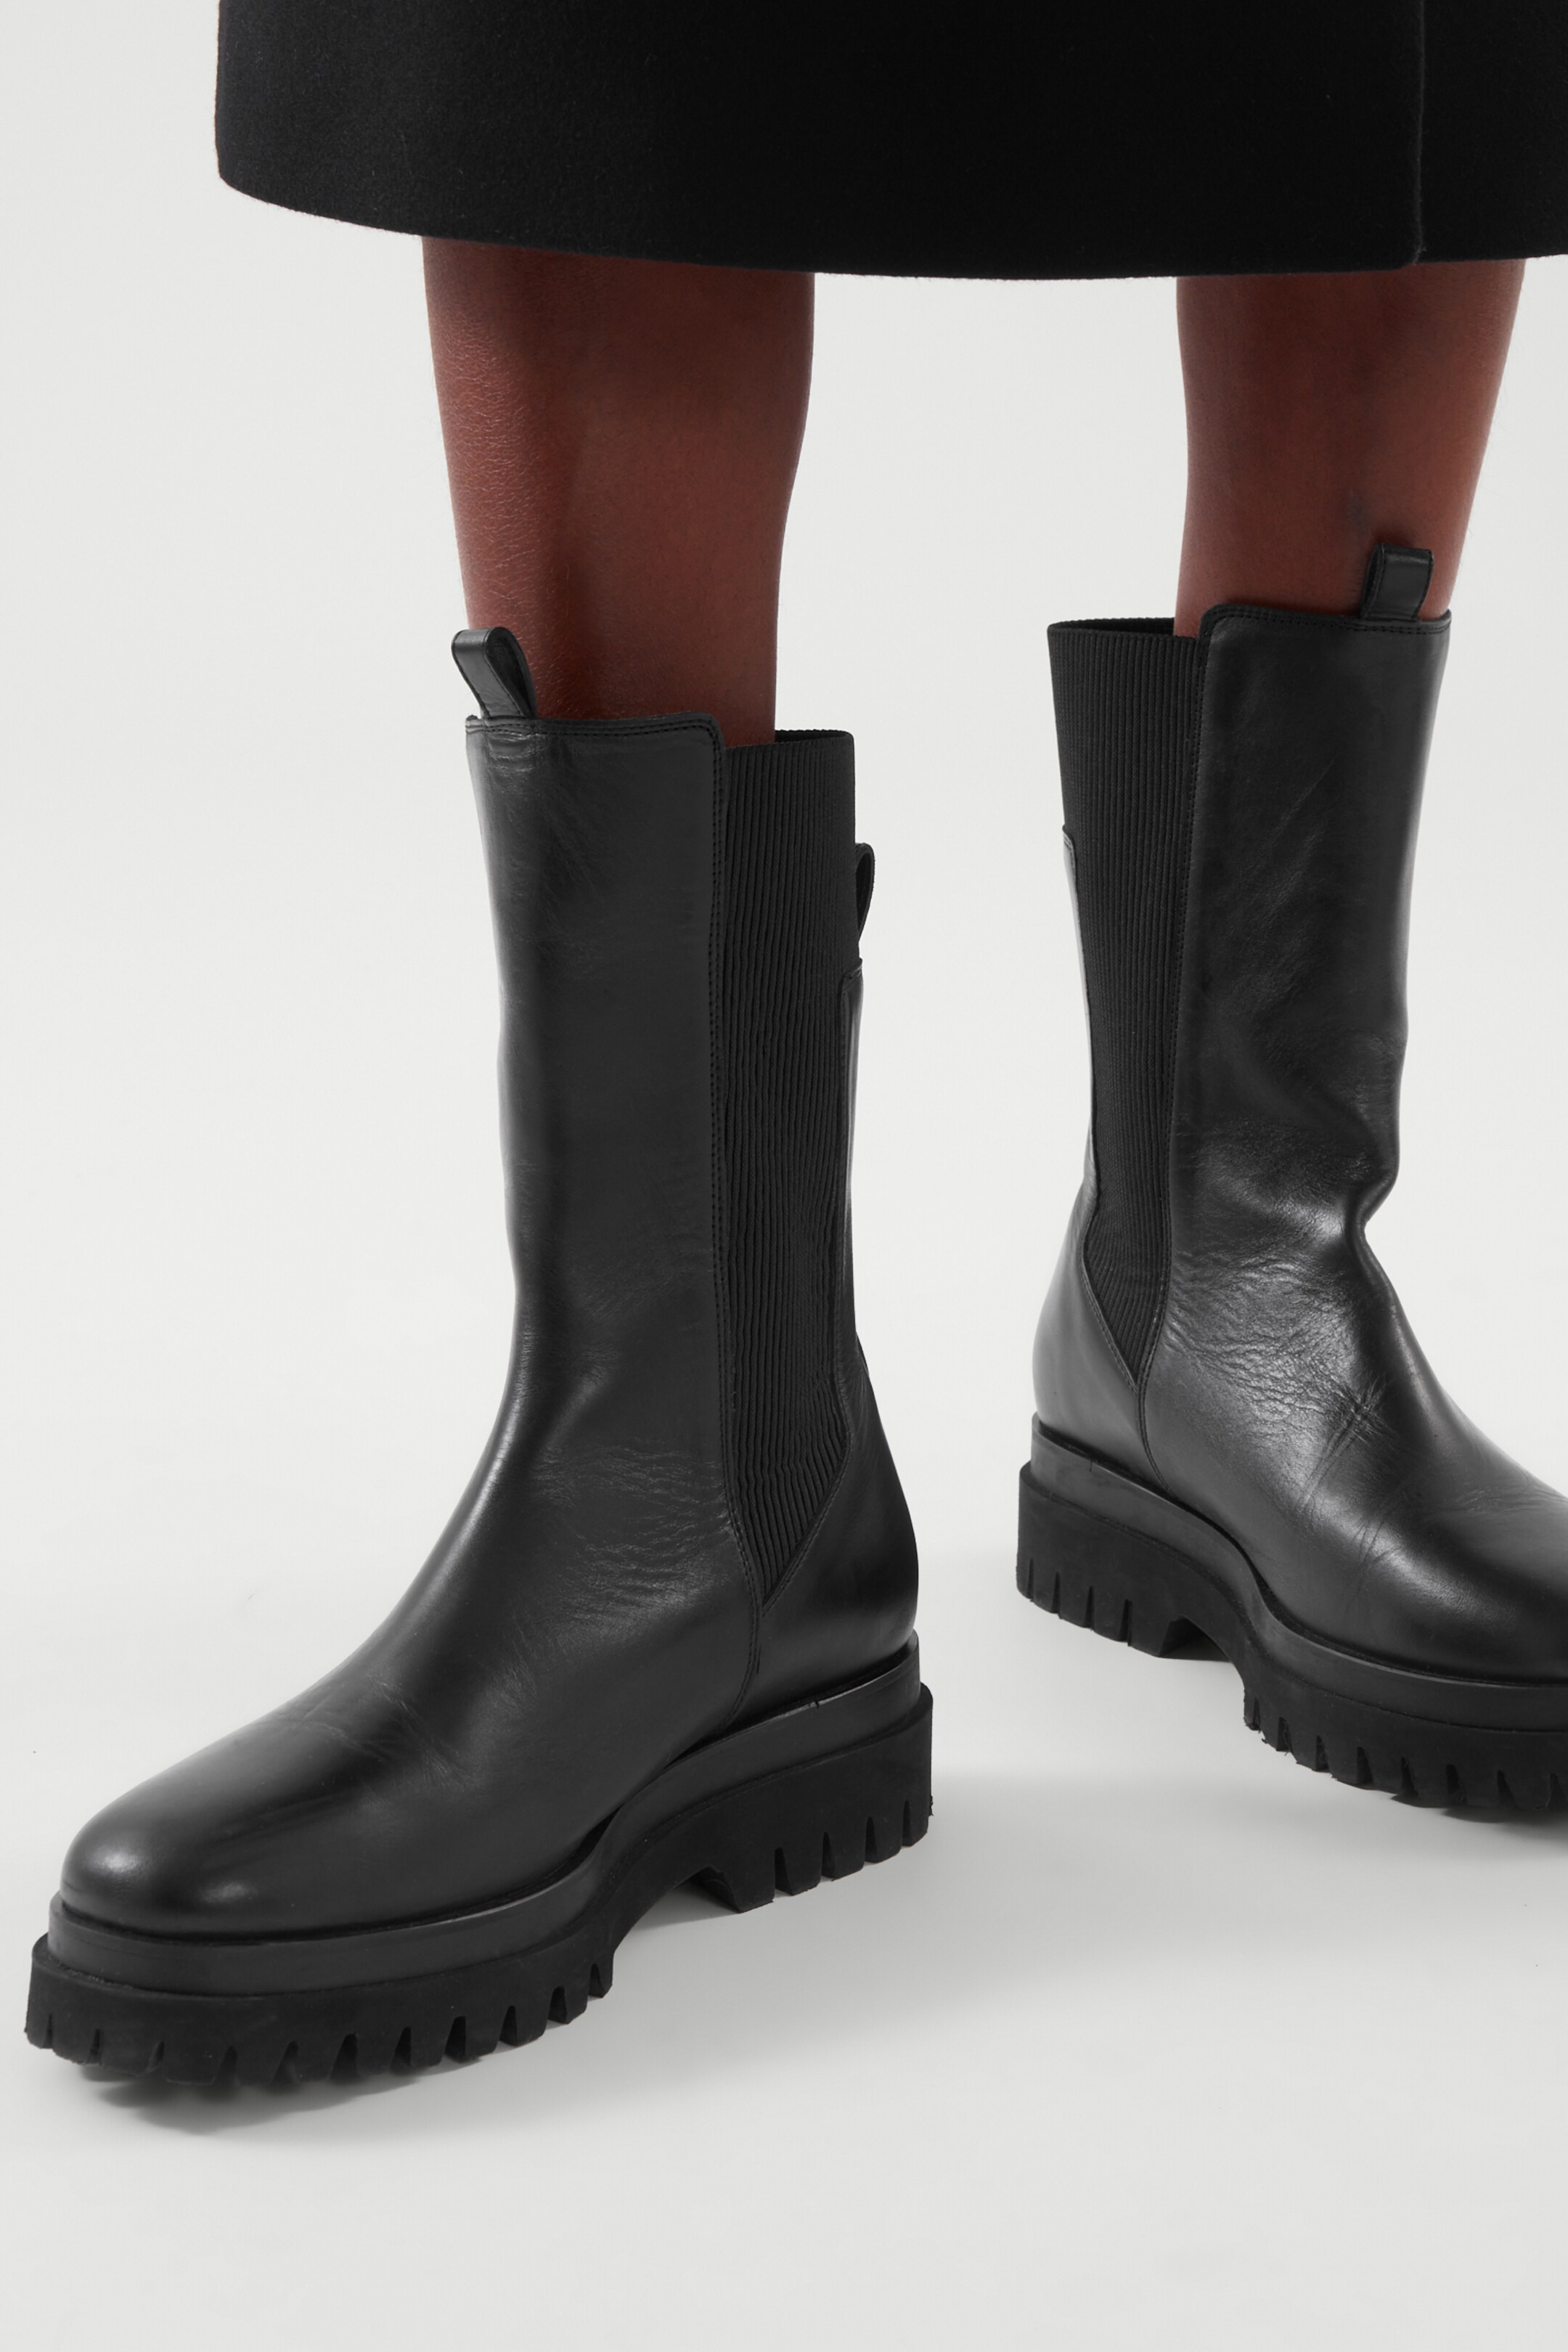 Bottom image of cos CHUNKY LEATHER CHELSEA BOOTS in black